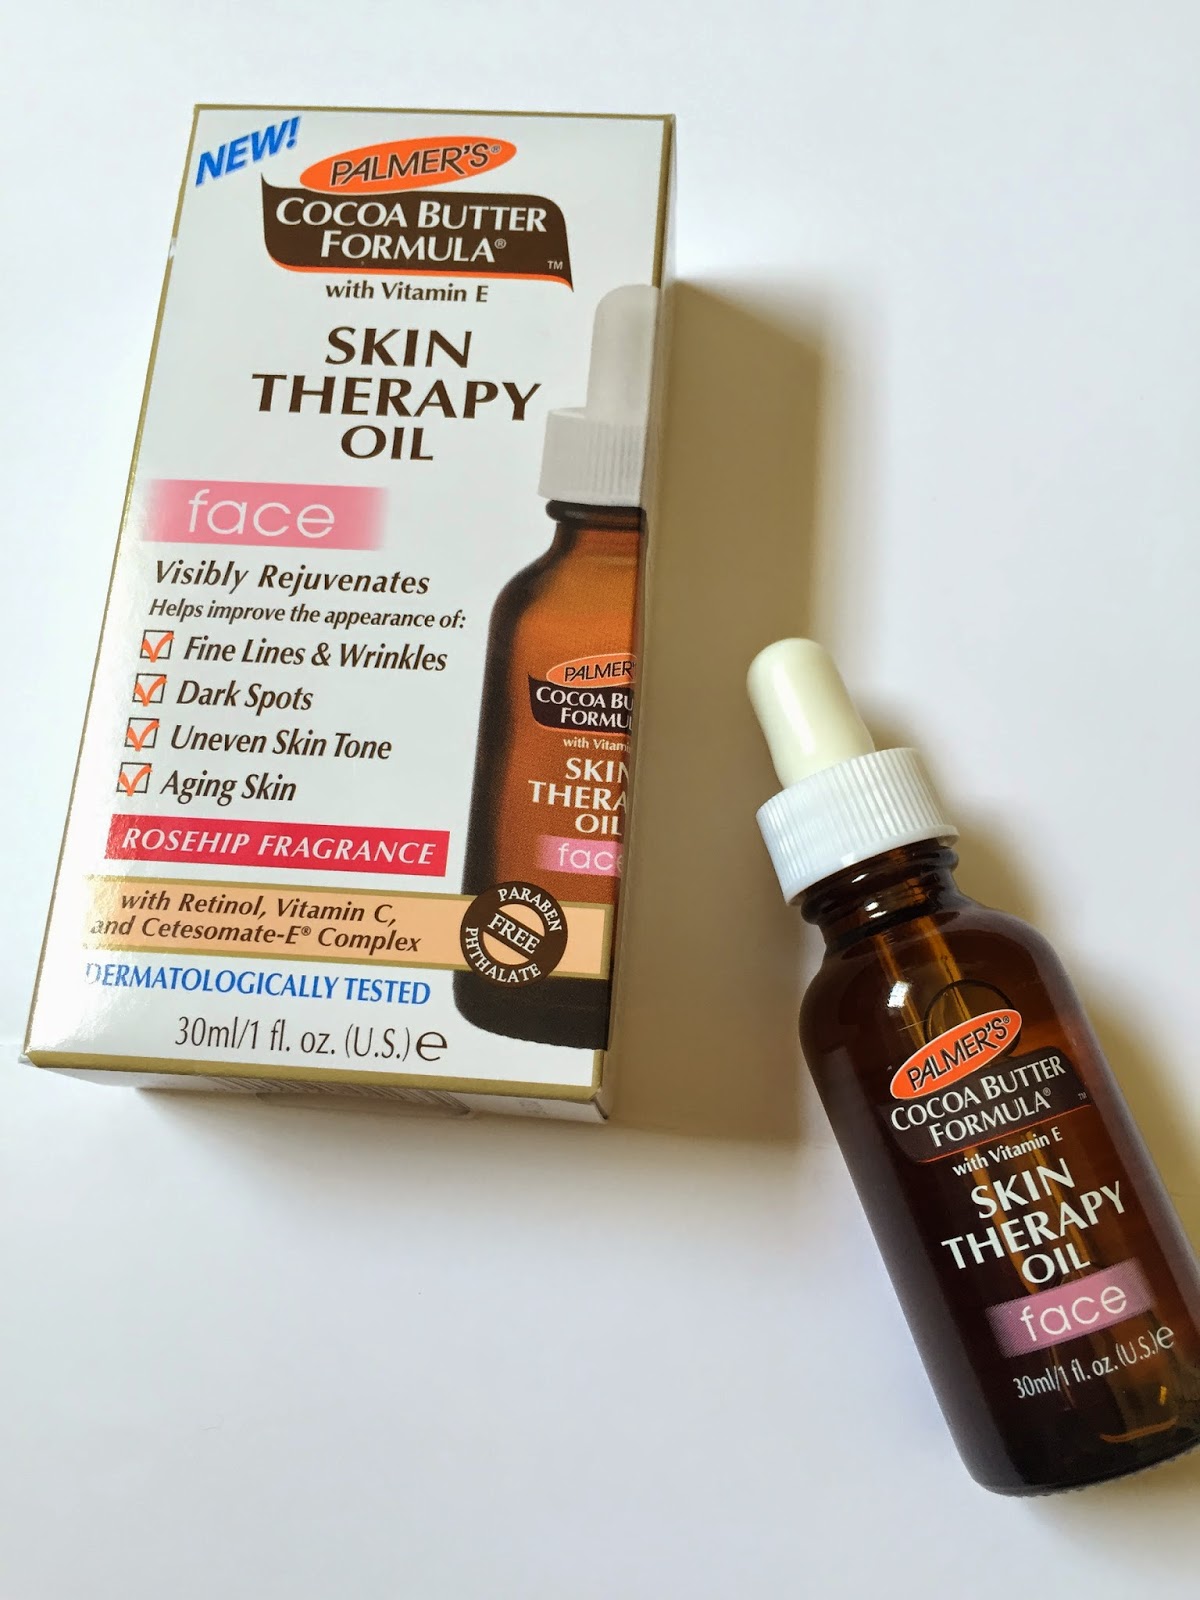 Palmer’s Skin Therapy Oil for face - Felicia